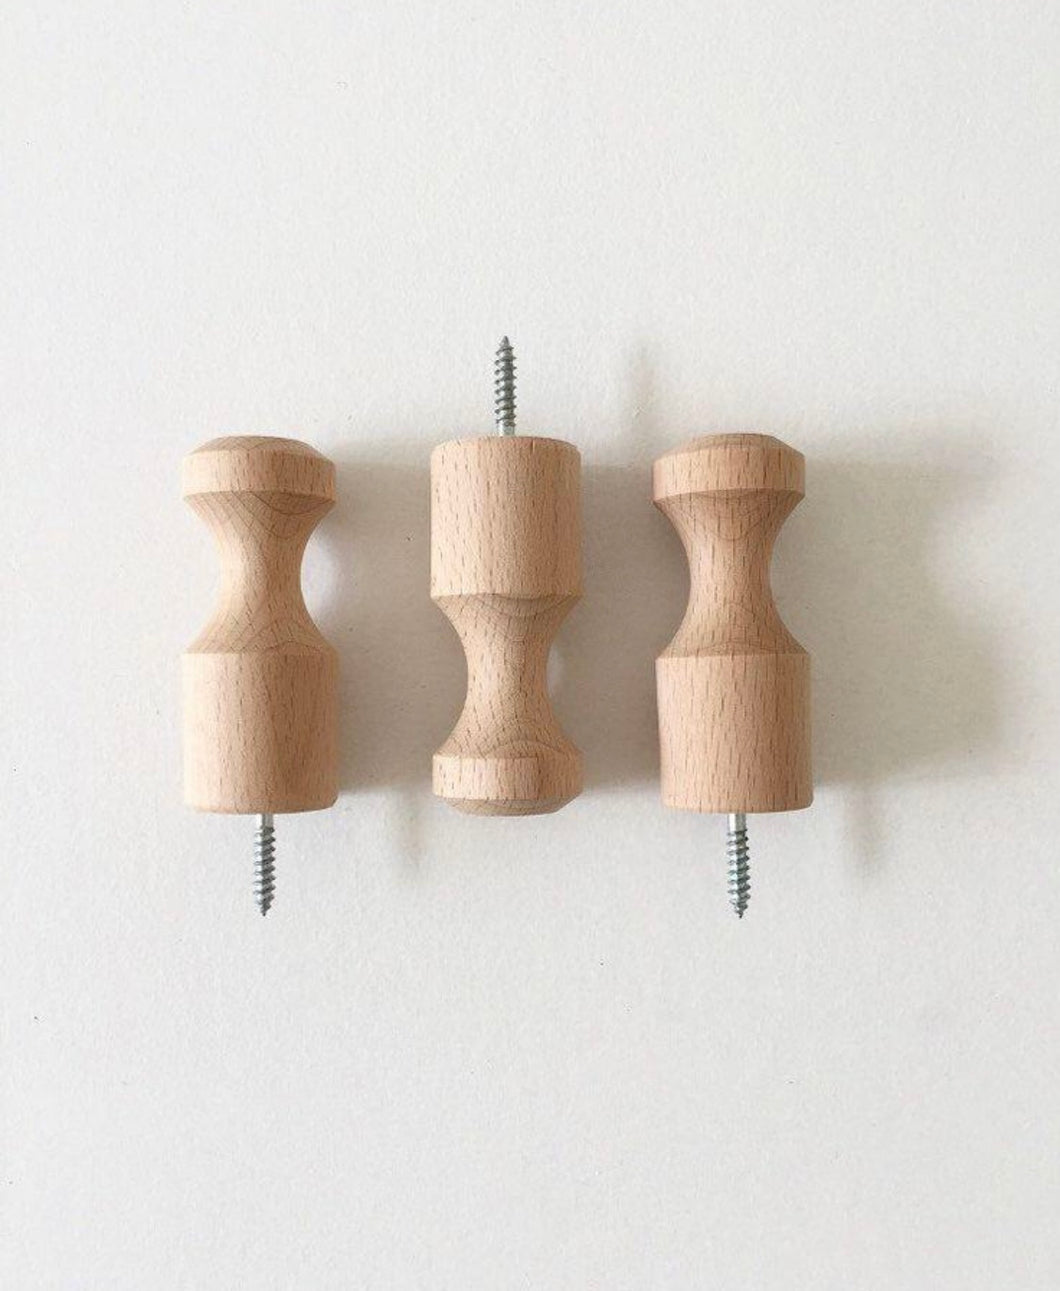 Wooden Wall Pegs